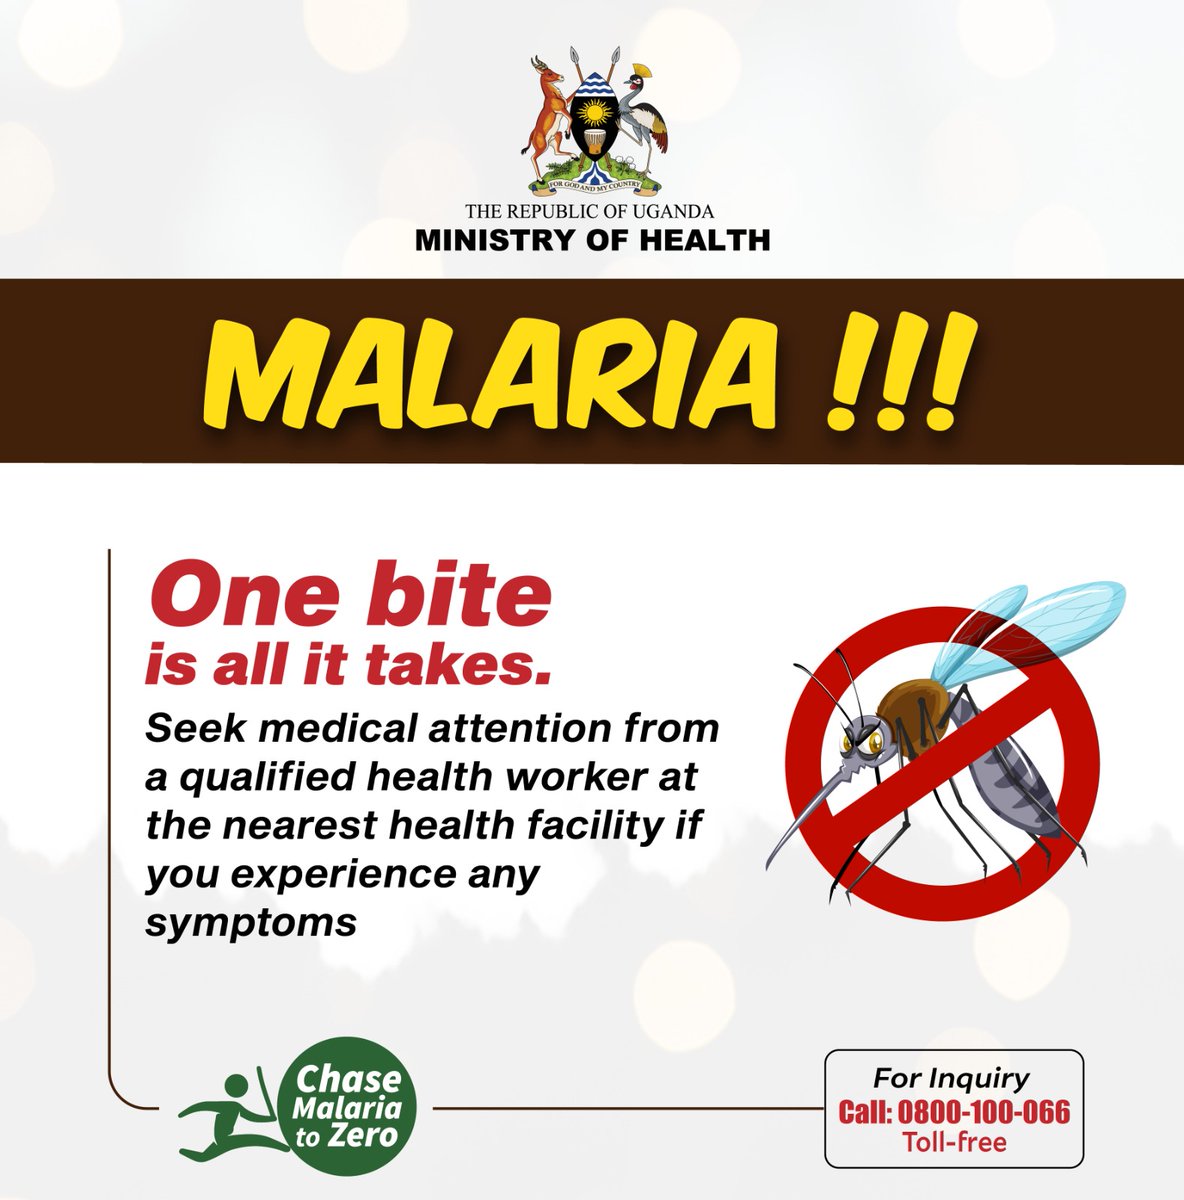 @MinofHealthUG If you experience signs and symptoms of #Malaria, seek immediate medical attention from a qualified health worker at the nearest health facility. 
Do NOT self-medicate! #ChaseMalariaUG #WorldMalariaDayUG